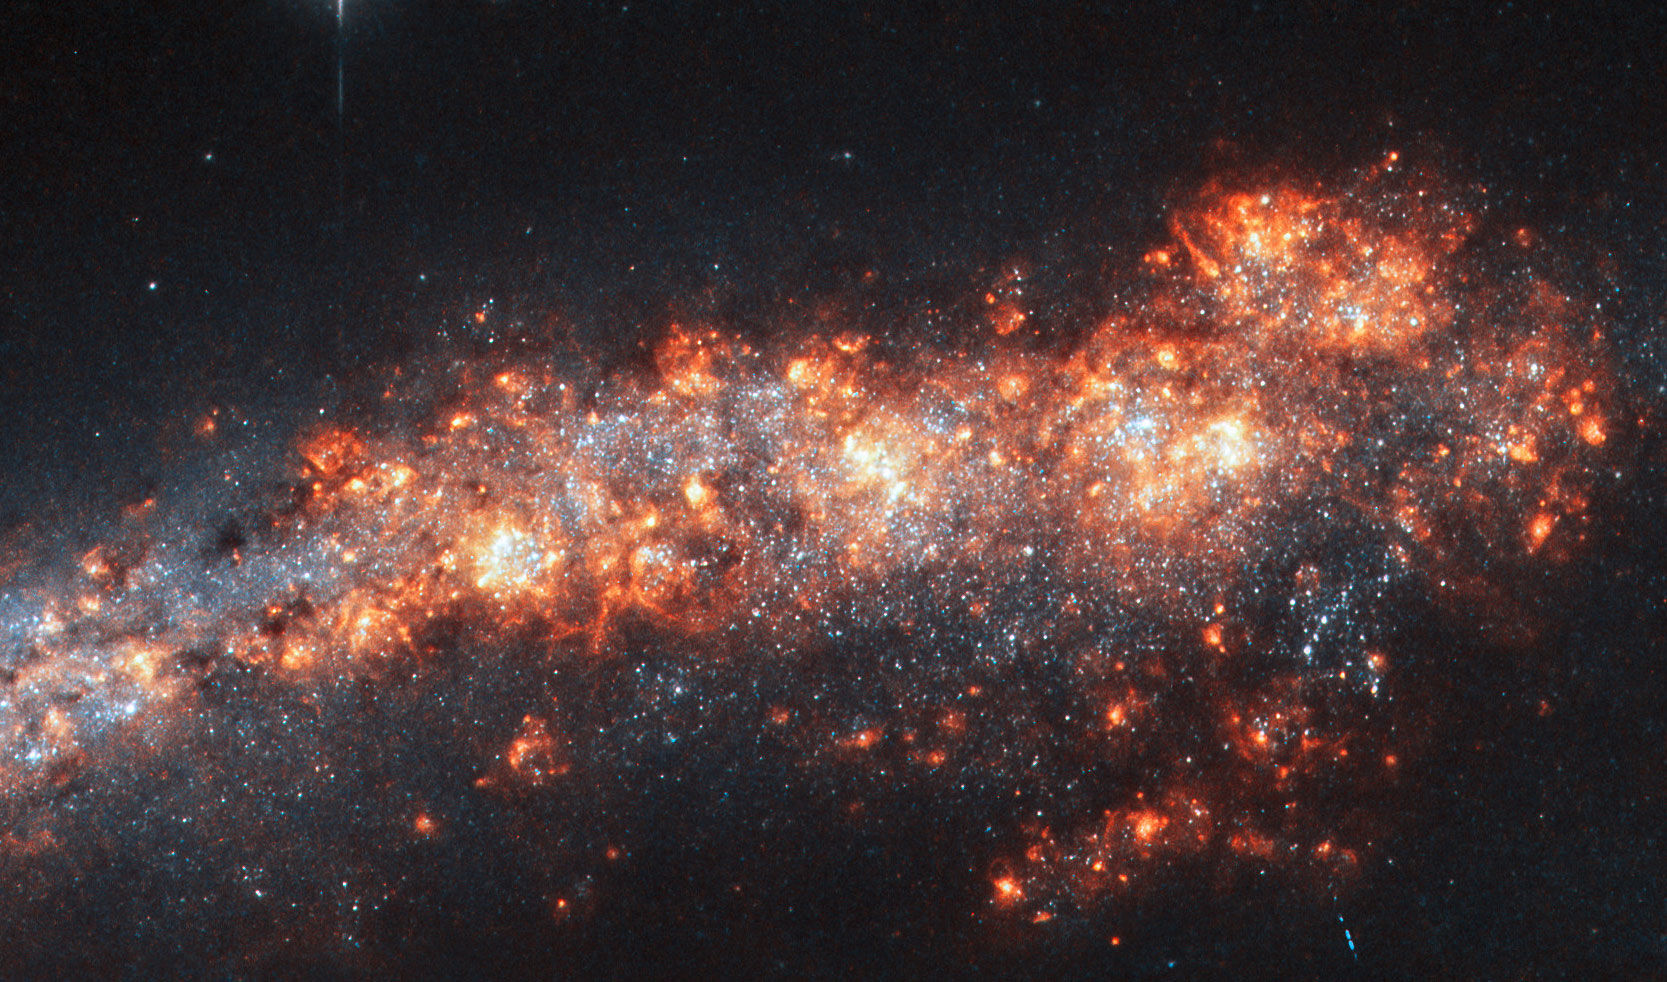 The edge-on spiral galaxy NGC 3432 shows off a lot of gas clouds in this image from Hubble Space Telescope. Credit: ESA/Hubble & NASA, A. Filippenko, R. Jansen